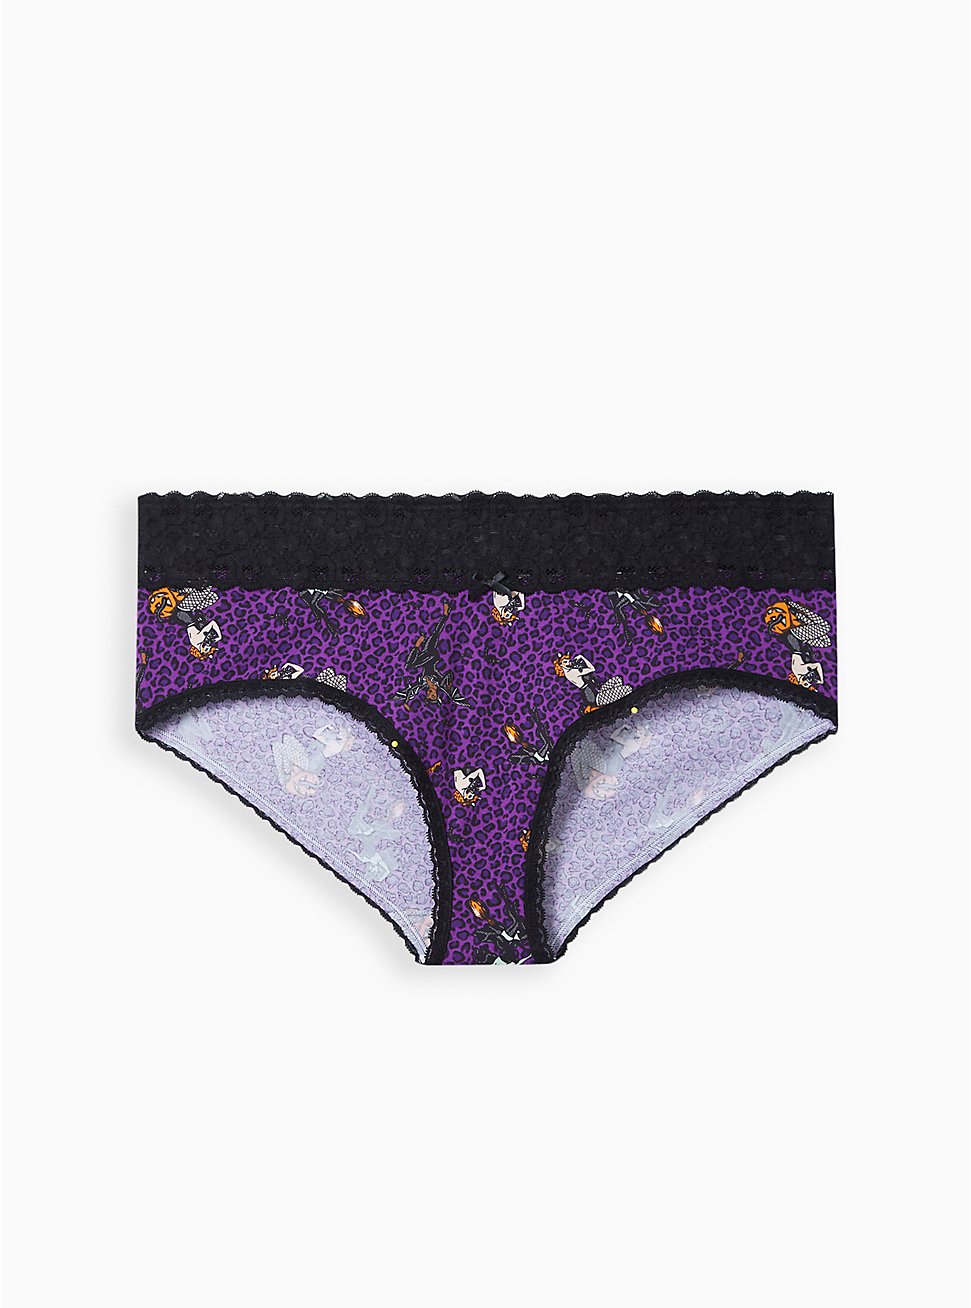 Cotton Mid-Rise Cheeky Lace Trim Panty, PIN UP HALLOWEEN PURPLE, hi-res